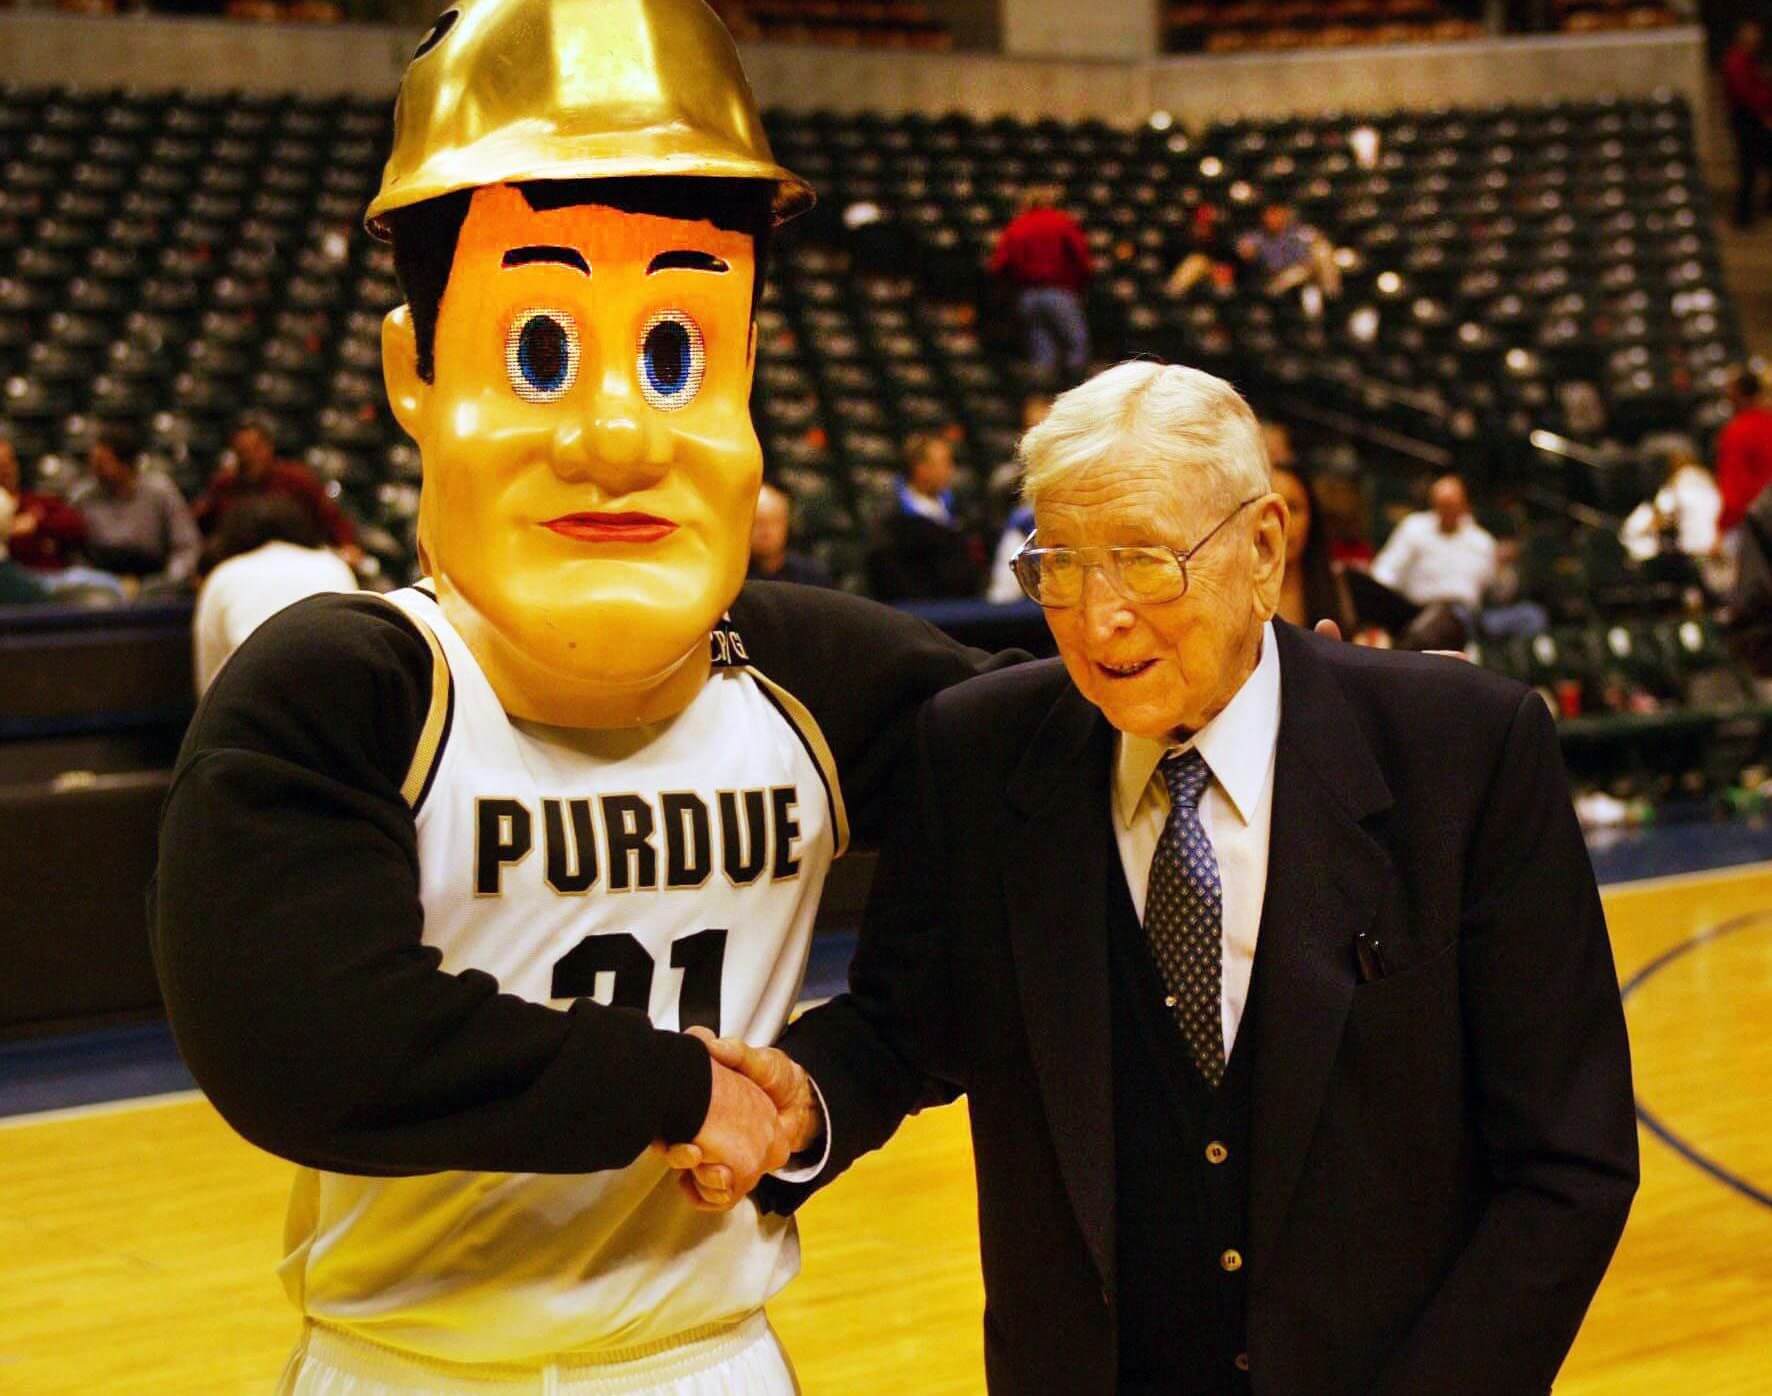 Charlie Nichols was thrilled to get to pose for a photo with legendary coach John Wooden in Indianapolis in 2002. (Photo Provided)